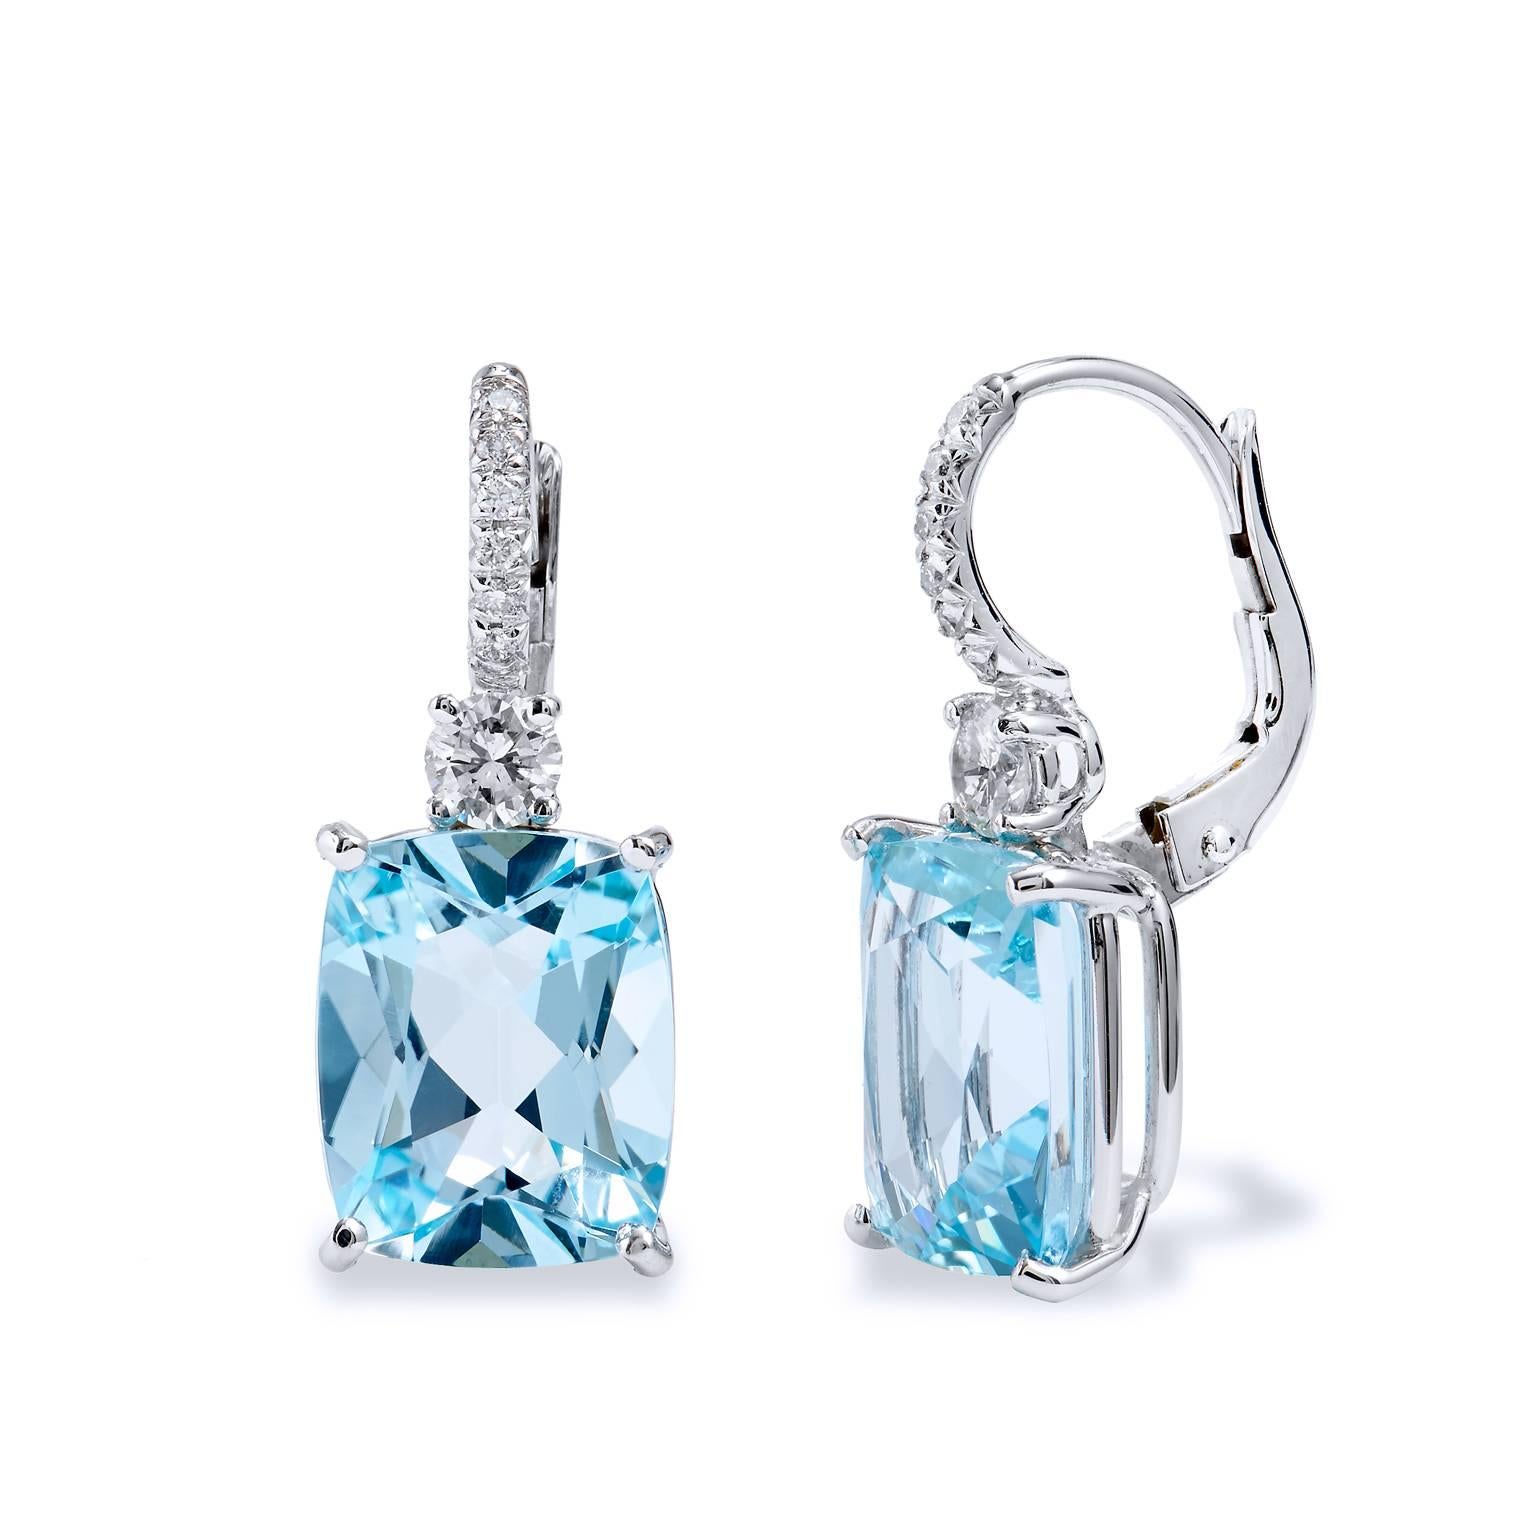 Awaking the senses to a scene in a winter snowfall, this pair of earrings features 10.25ct (11mmx9mm) of antique cut blue topaz that are suspended by .38ct of G/H SI1 diamonds mimicking the beauty of icicles. The color combination of the crisp blue